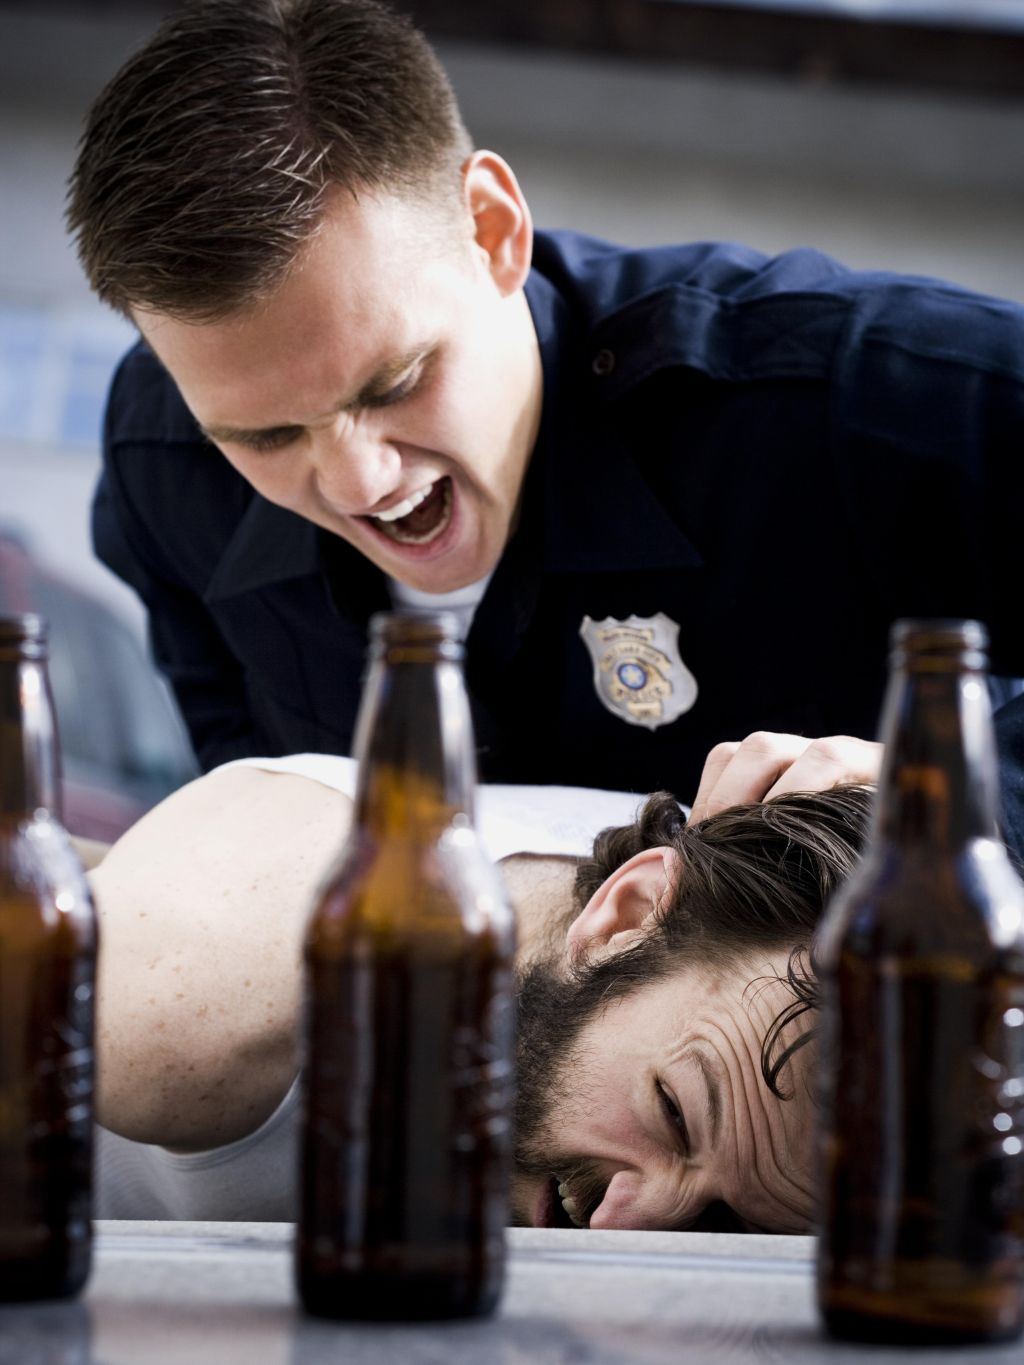 Police officer arresting man lying down with beer bottles